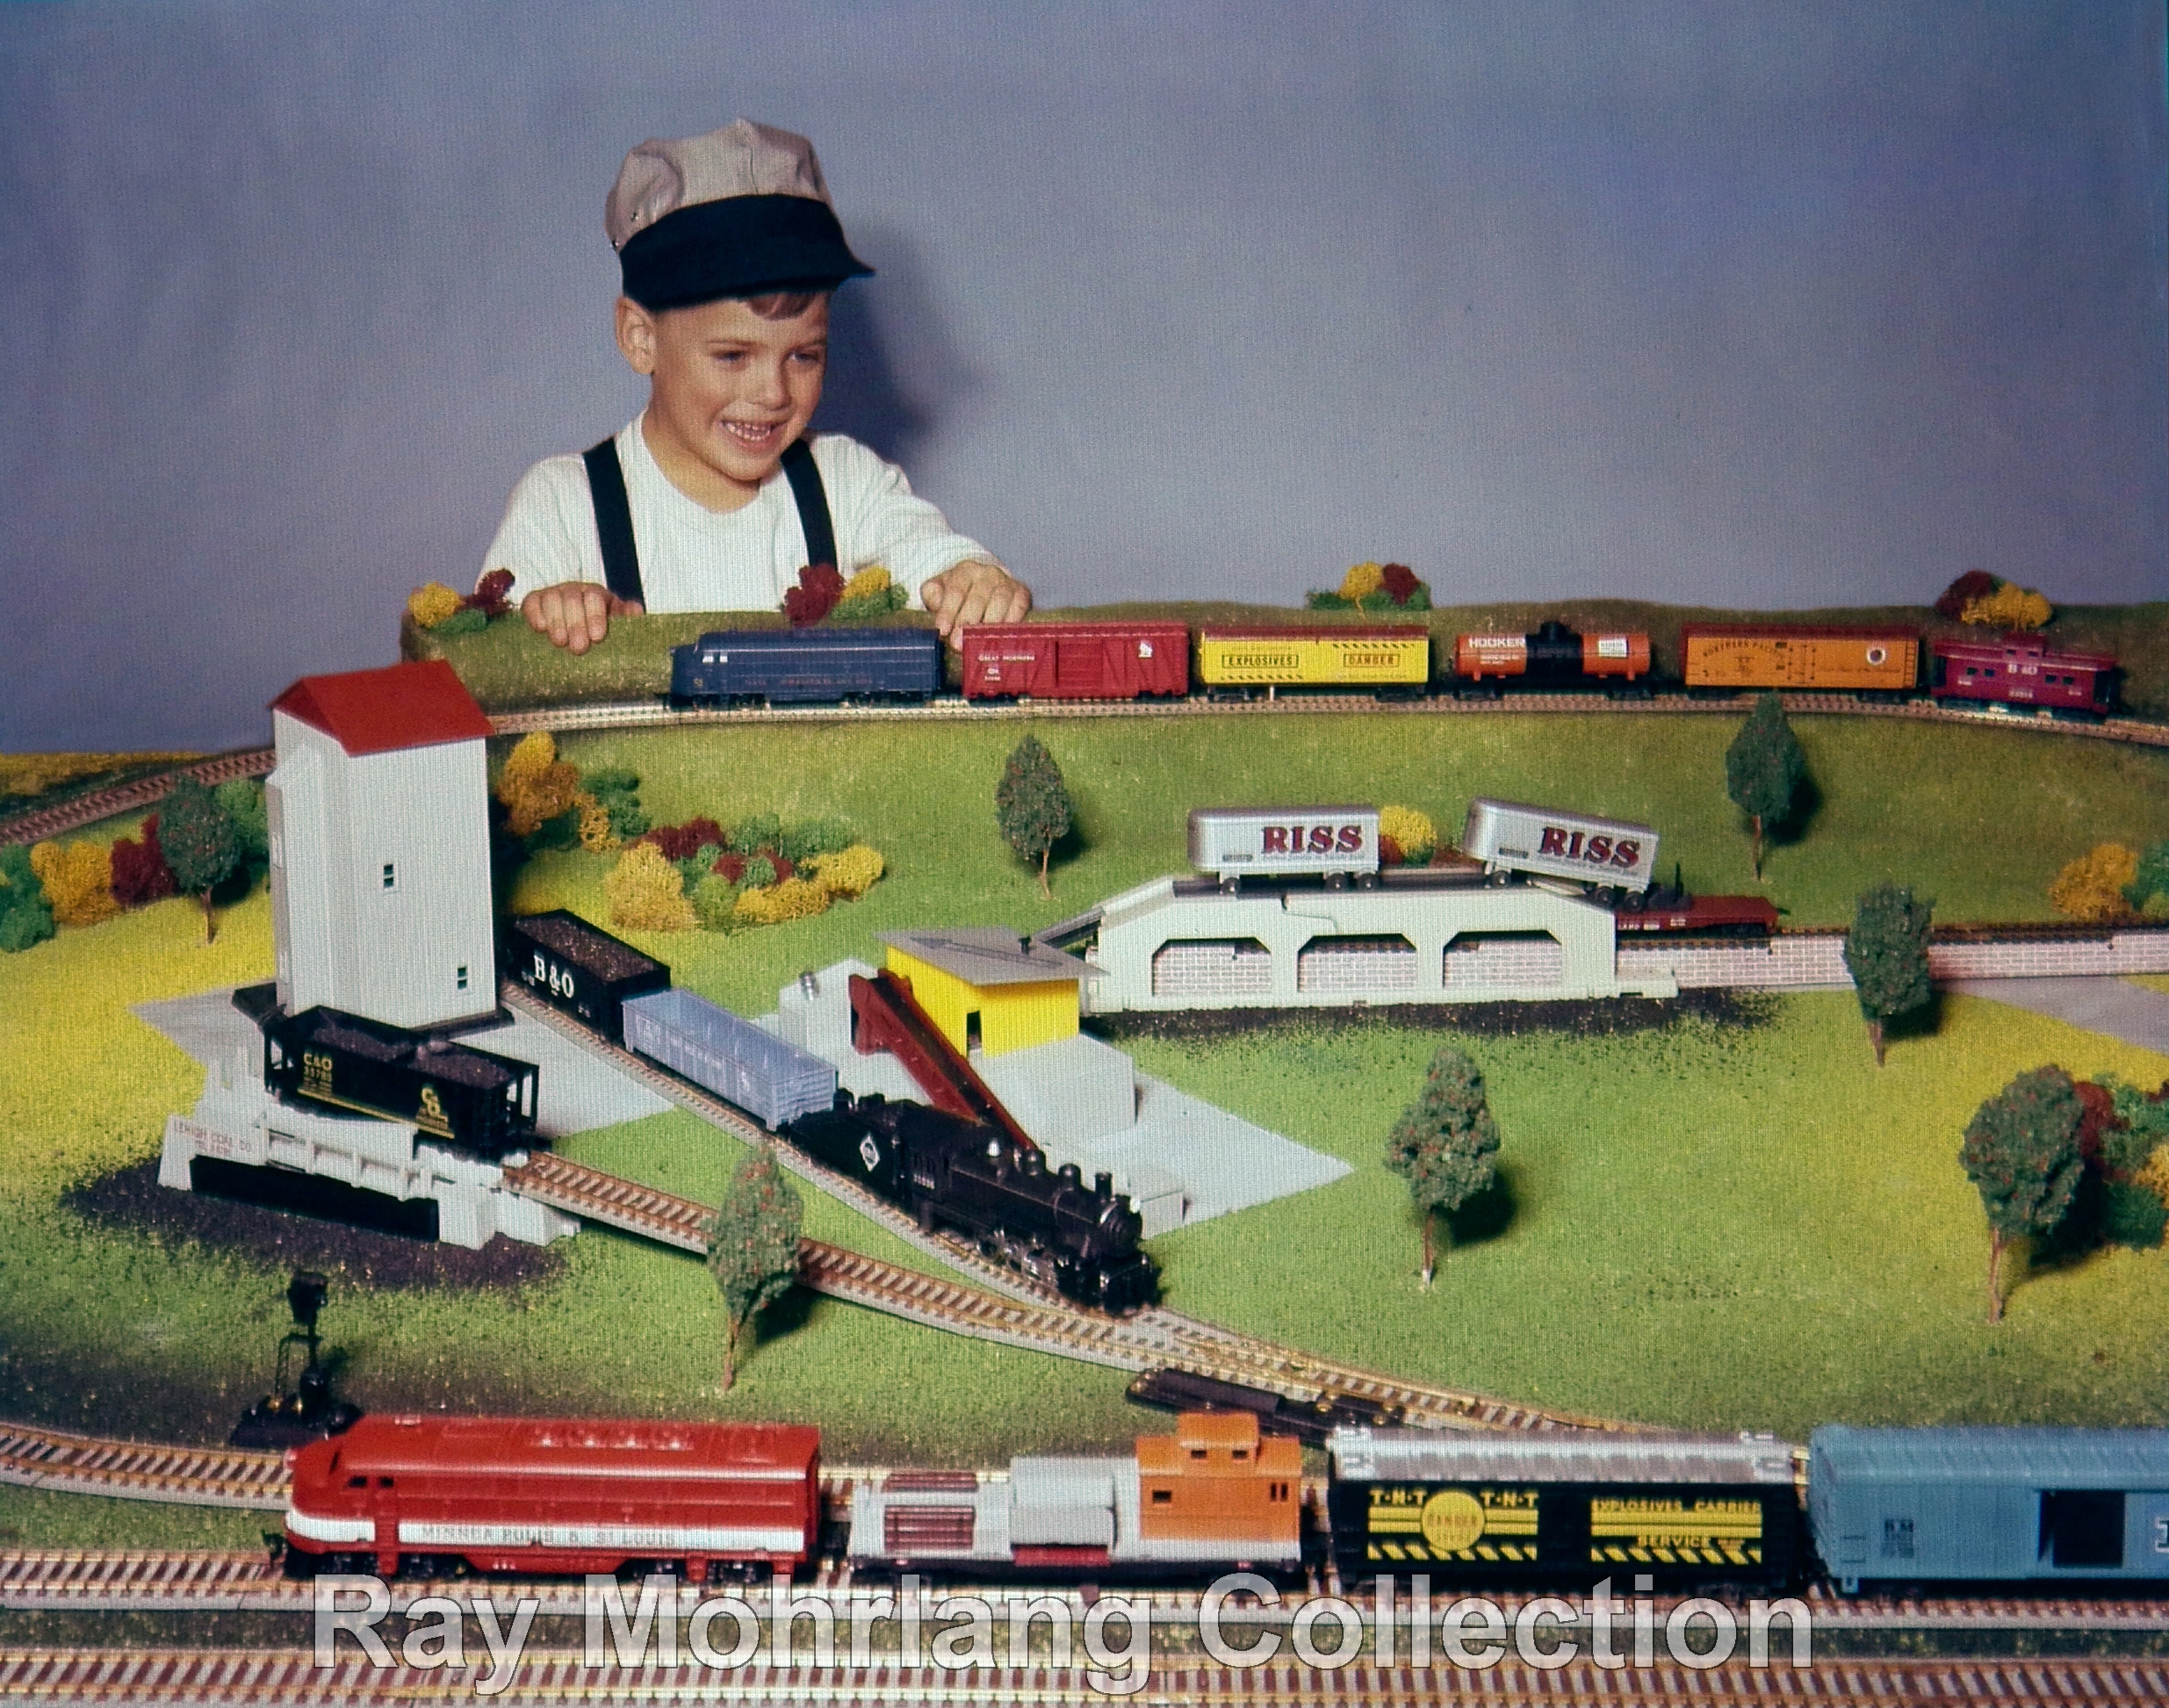 Small Boy with HO Trains 